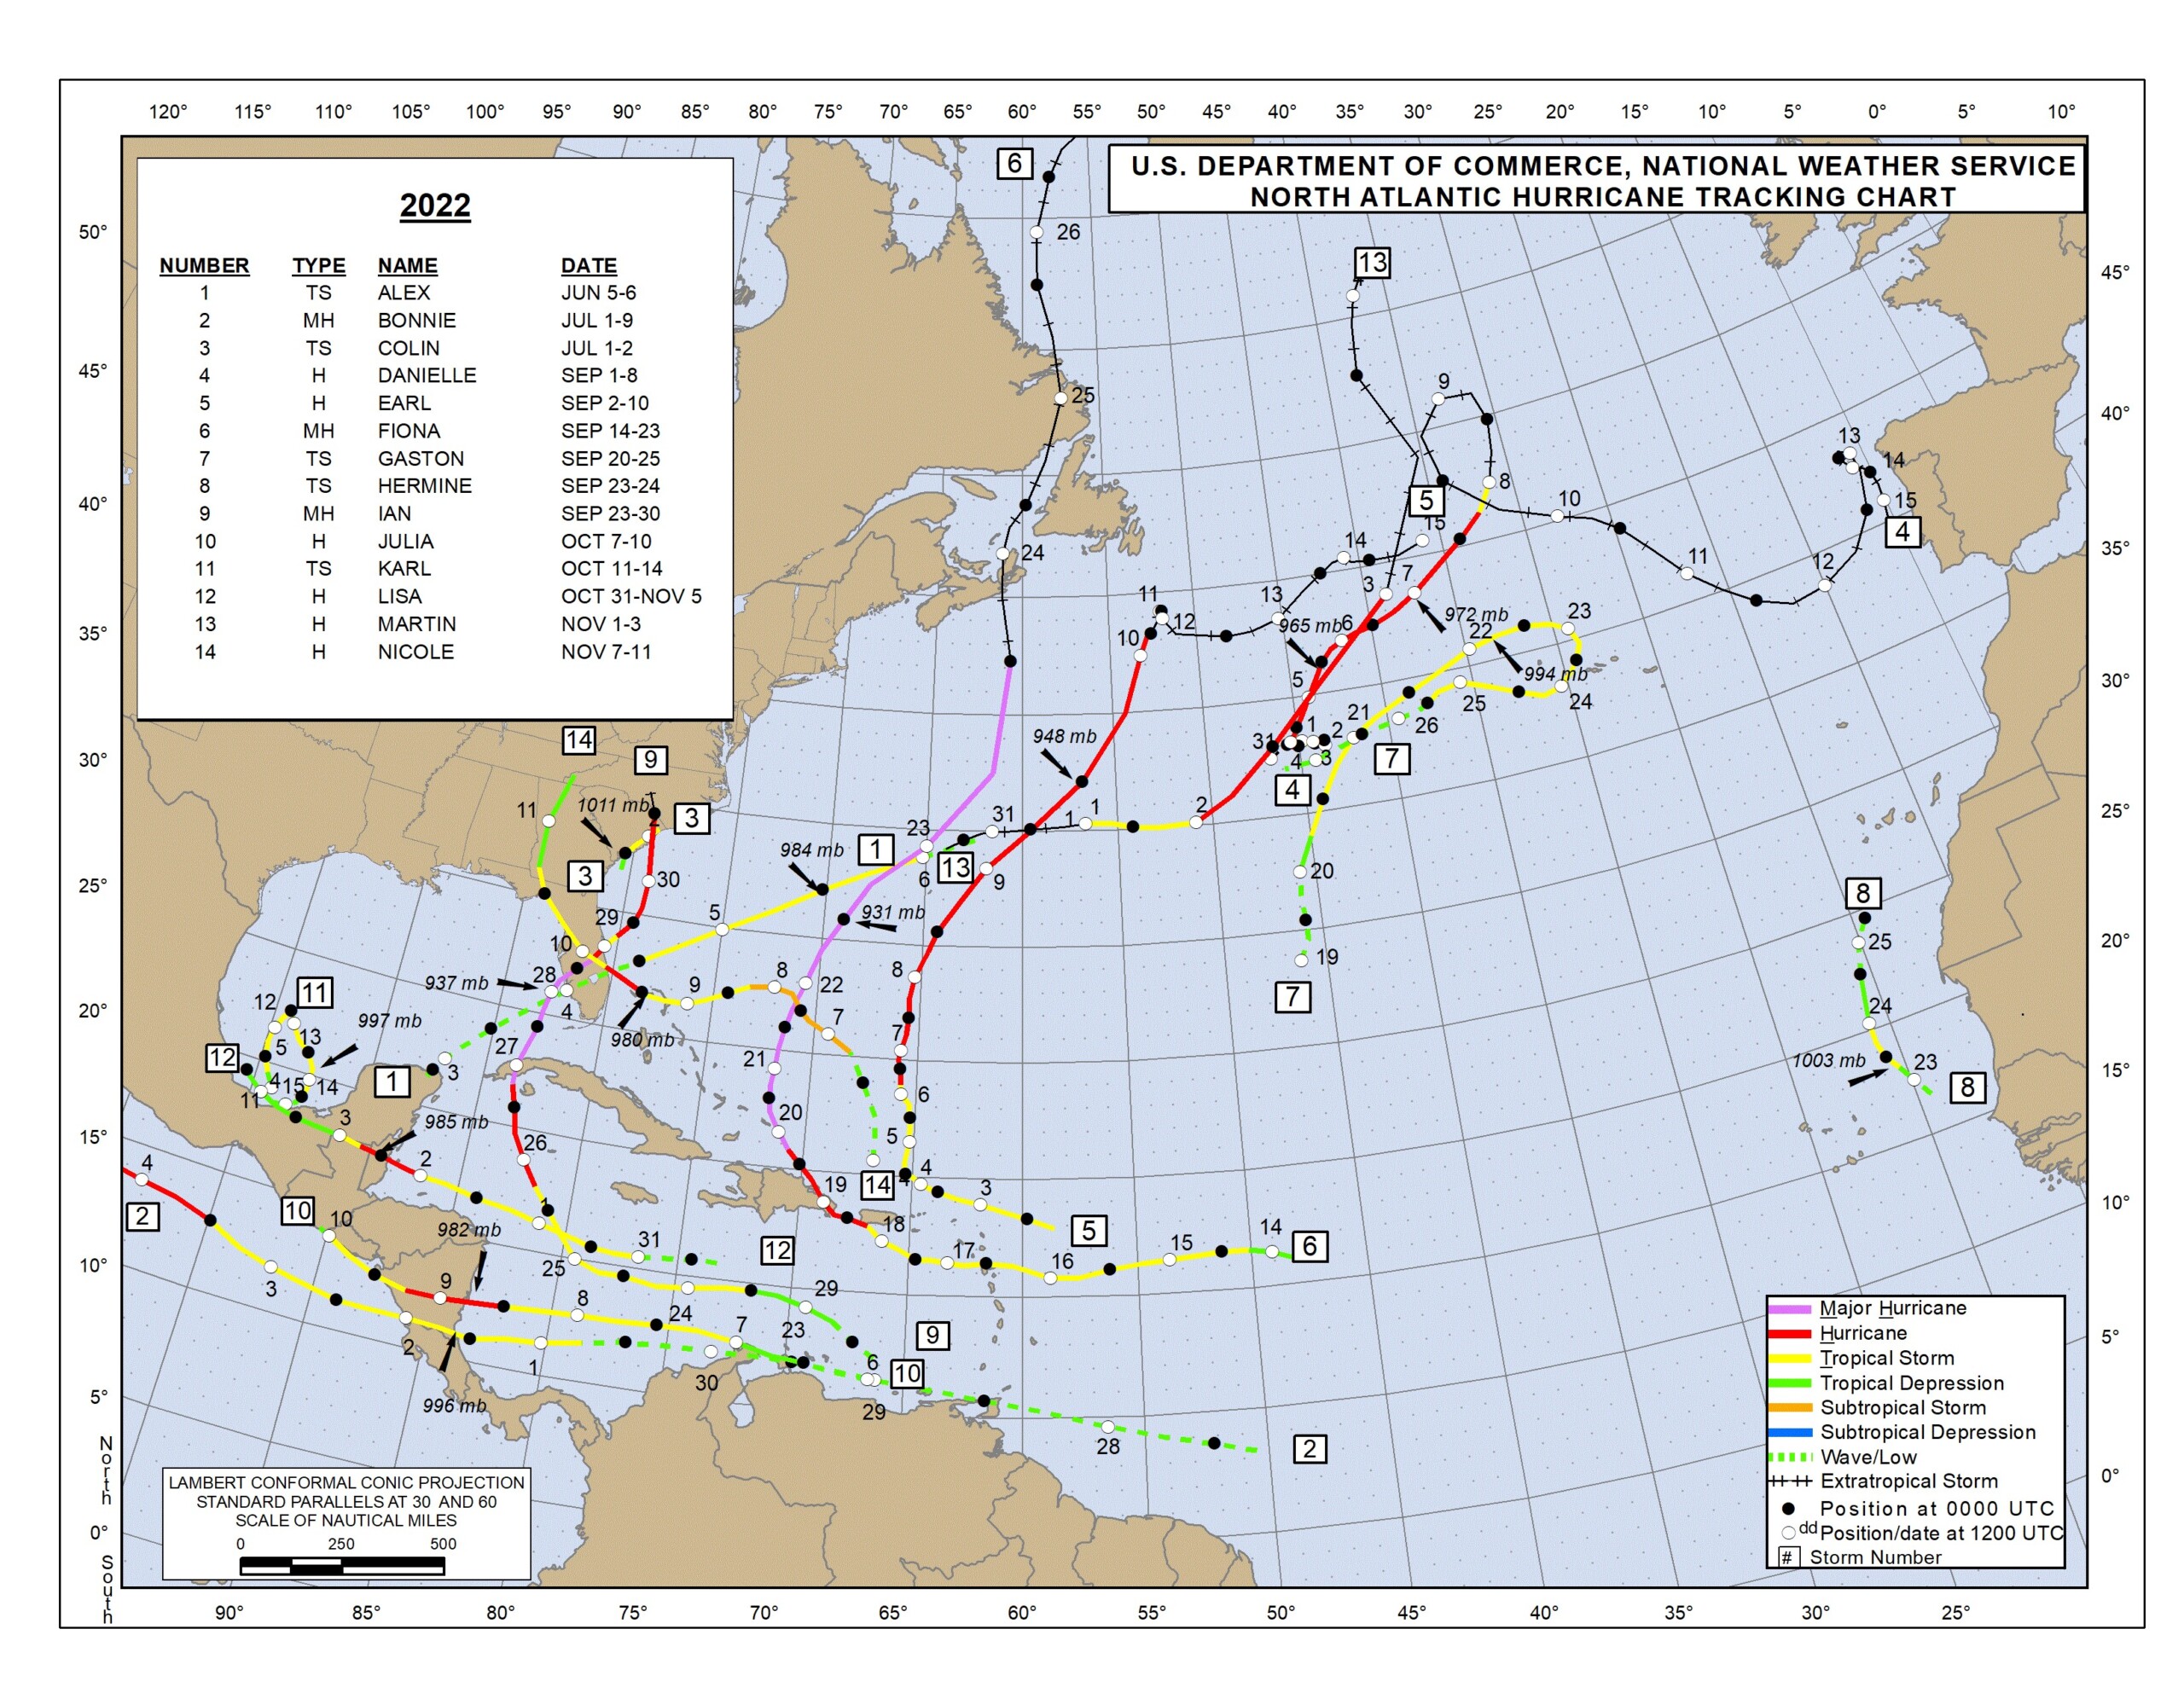 This map shows the tracks, names and start dates of all tropical cyclones in the 2022 Atlantic hurricane season. (Source: NOAA)